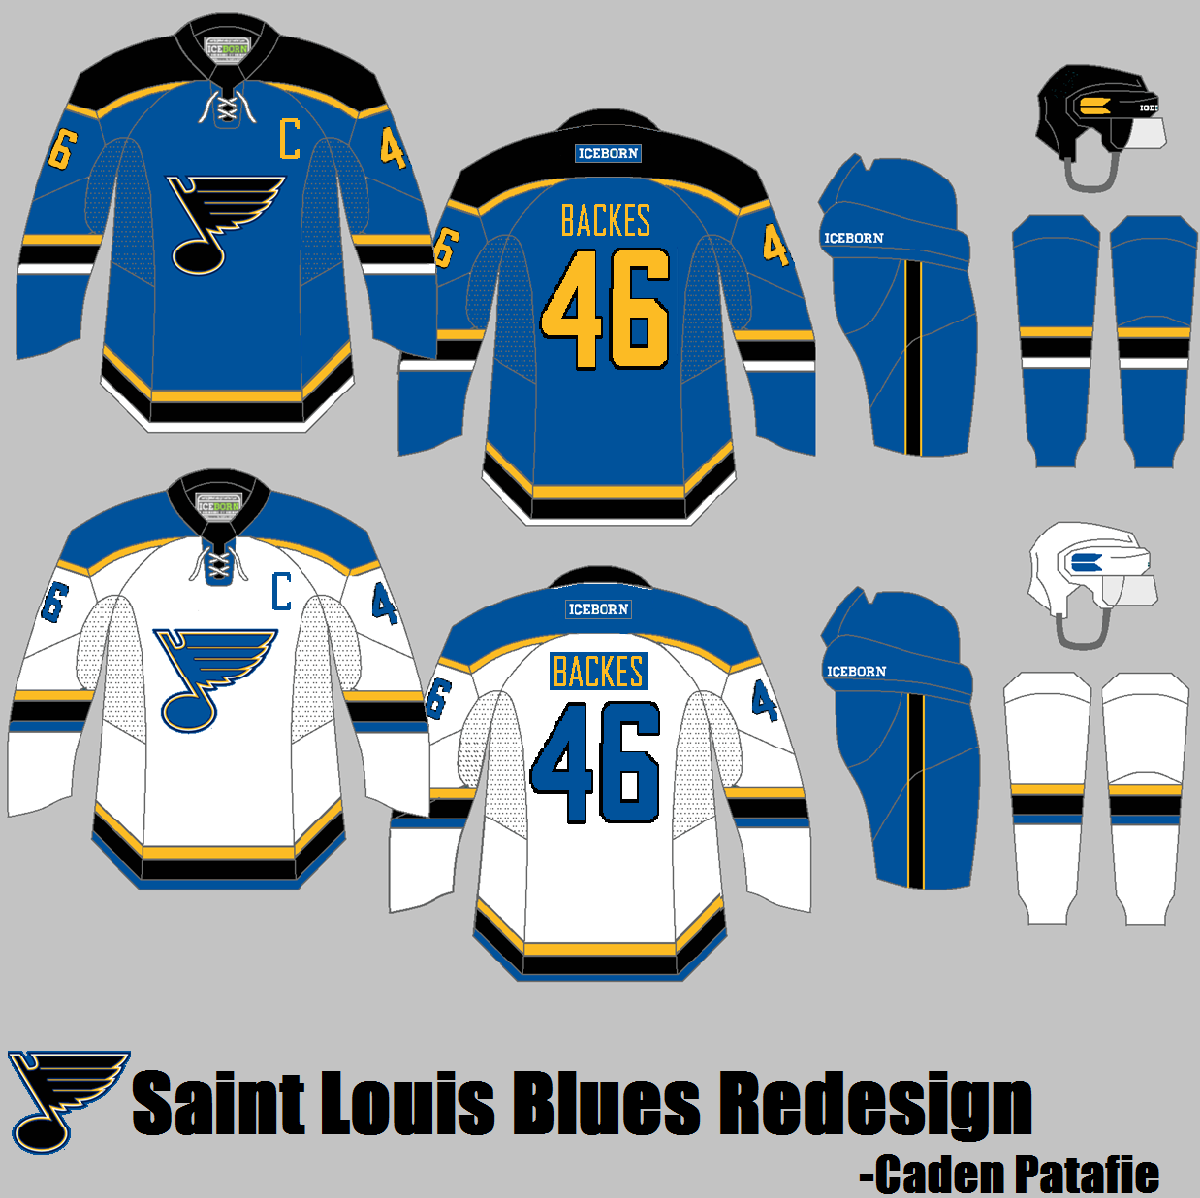 AJH Hockey Jersey Art: Crazy concept in a good way, and an mess up